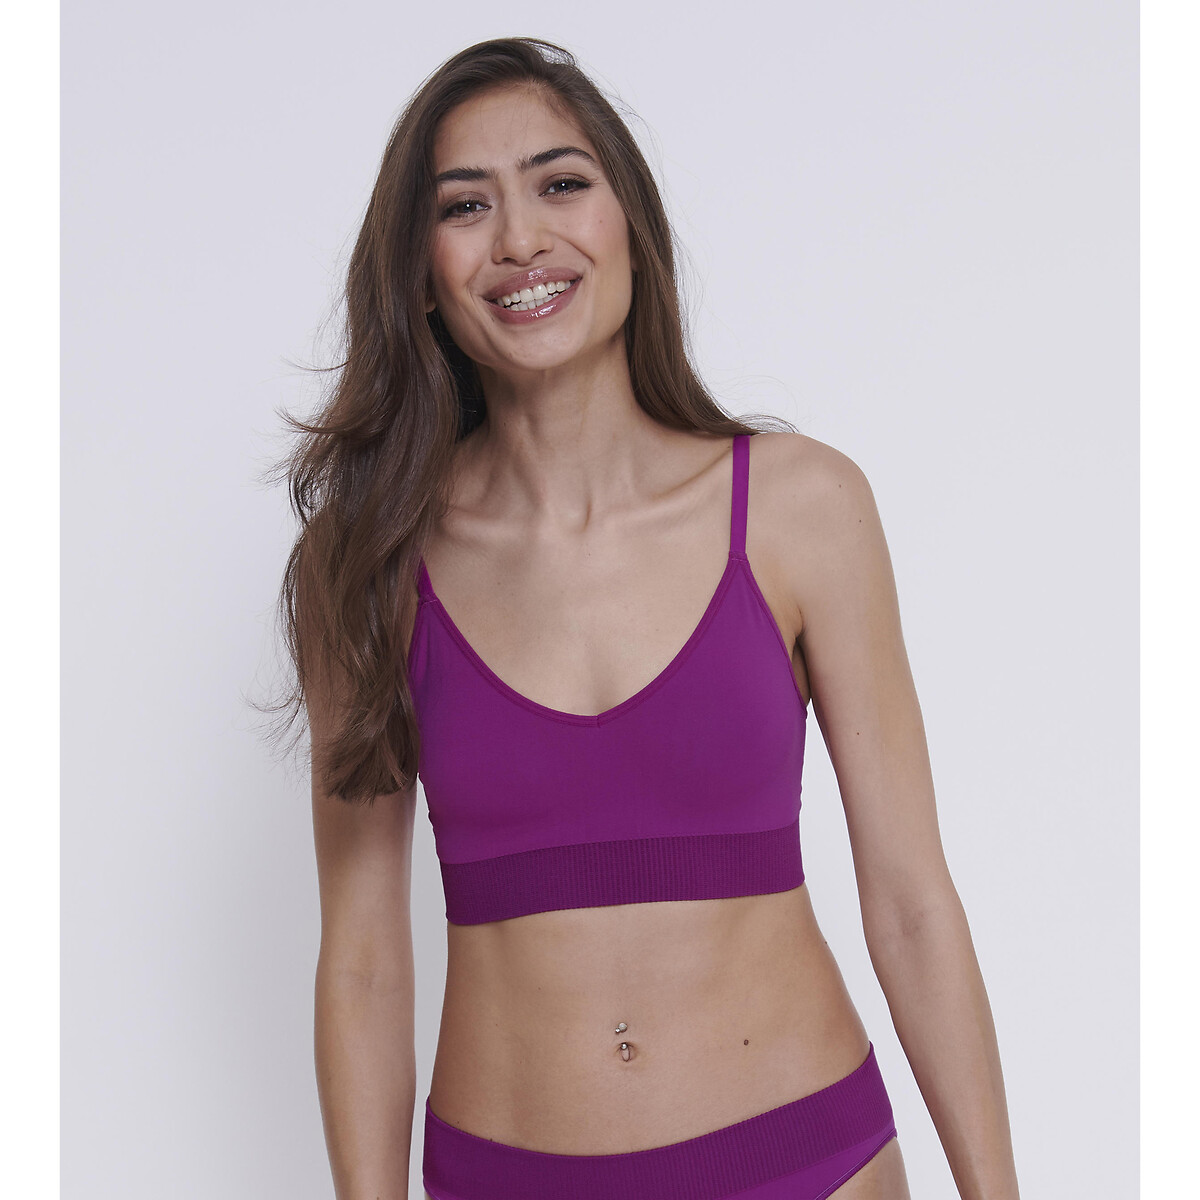 Sloggi Body Adapt seamless bralette with adjustable straps in pink